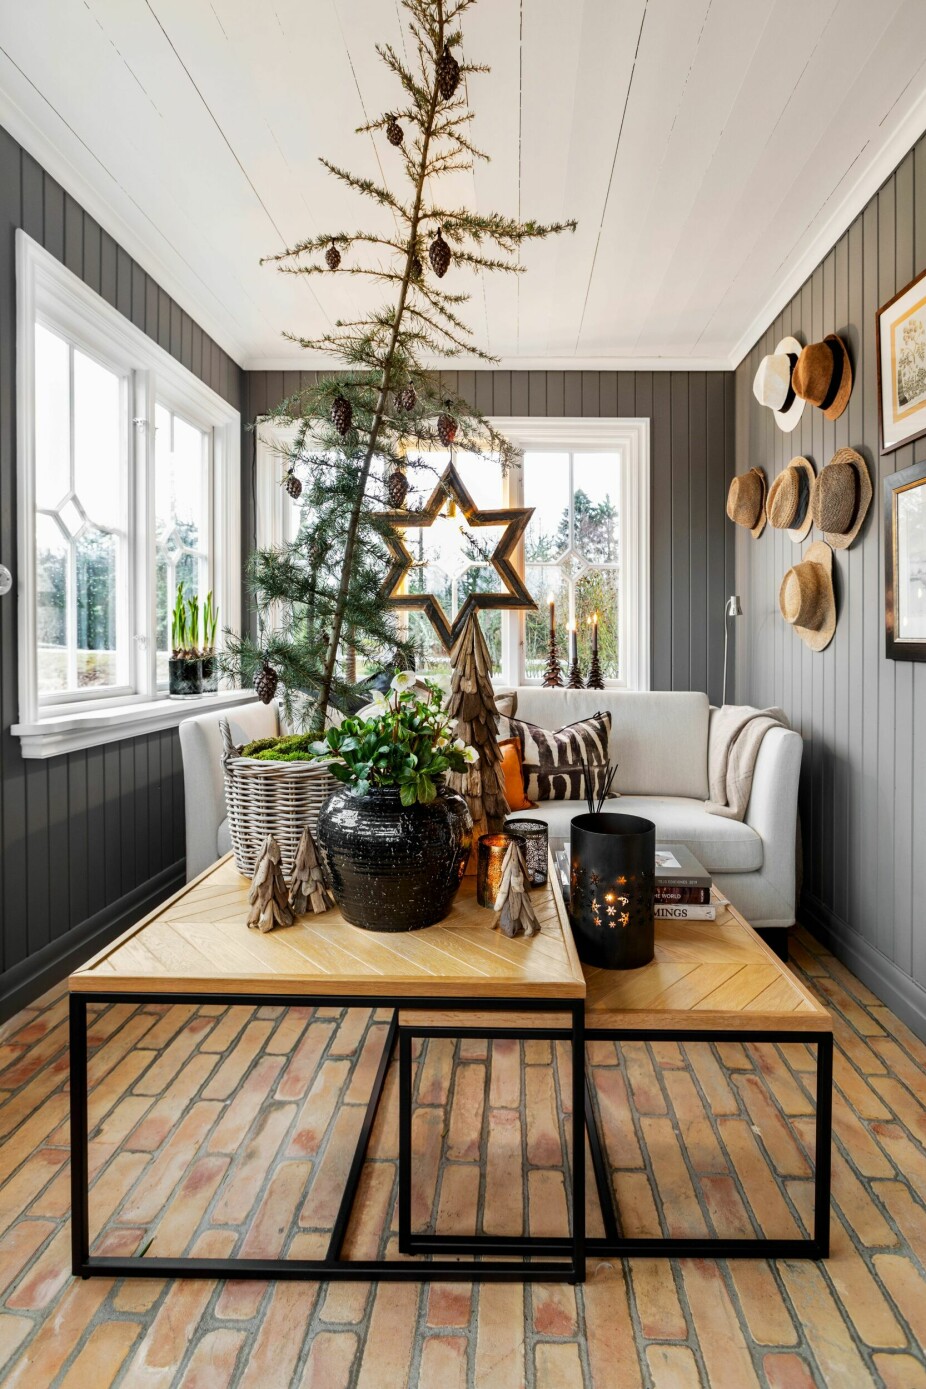 Also on the cozy glazed balcony, it is decorated for Christmas with a pine tree in a basket with moss.  Hanging on the wall a set of straw hats reminding you that one day summer will return.  The furniture was designed by Halvor.